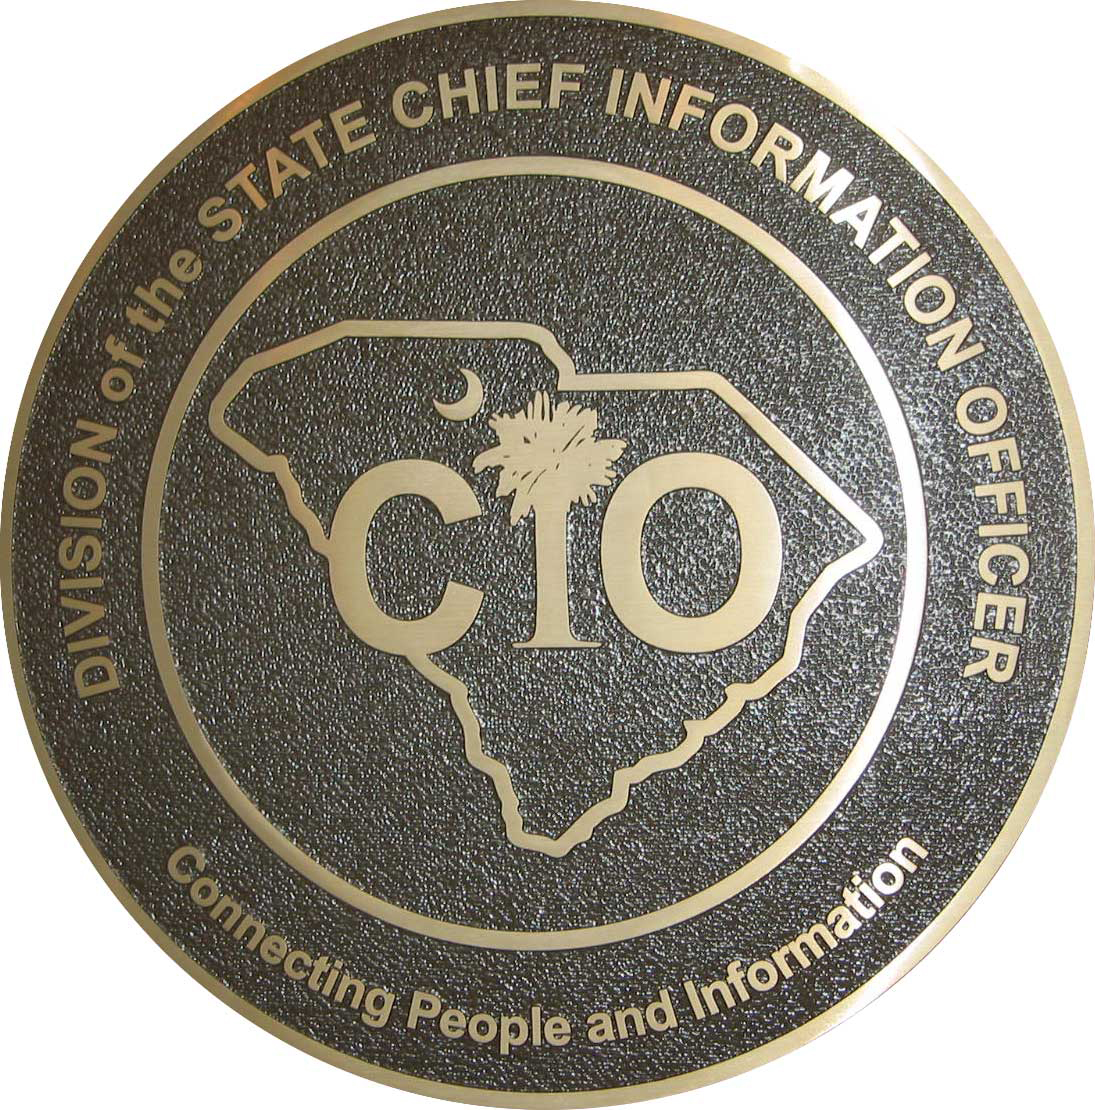 Seal of the Division of the State Chief Information Officer (CIO)